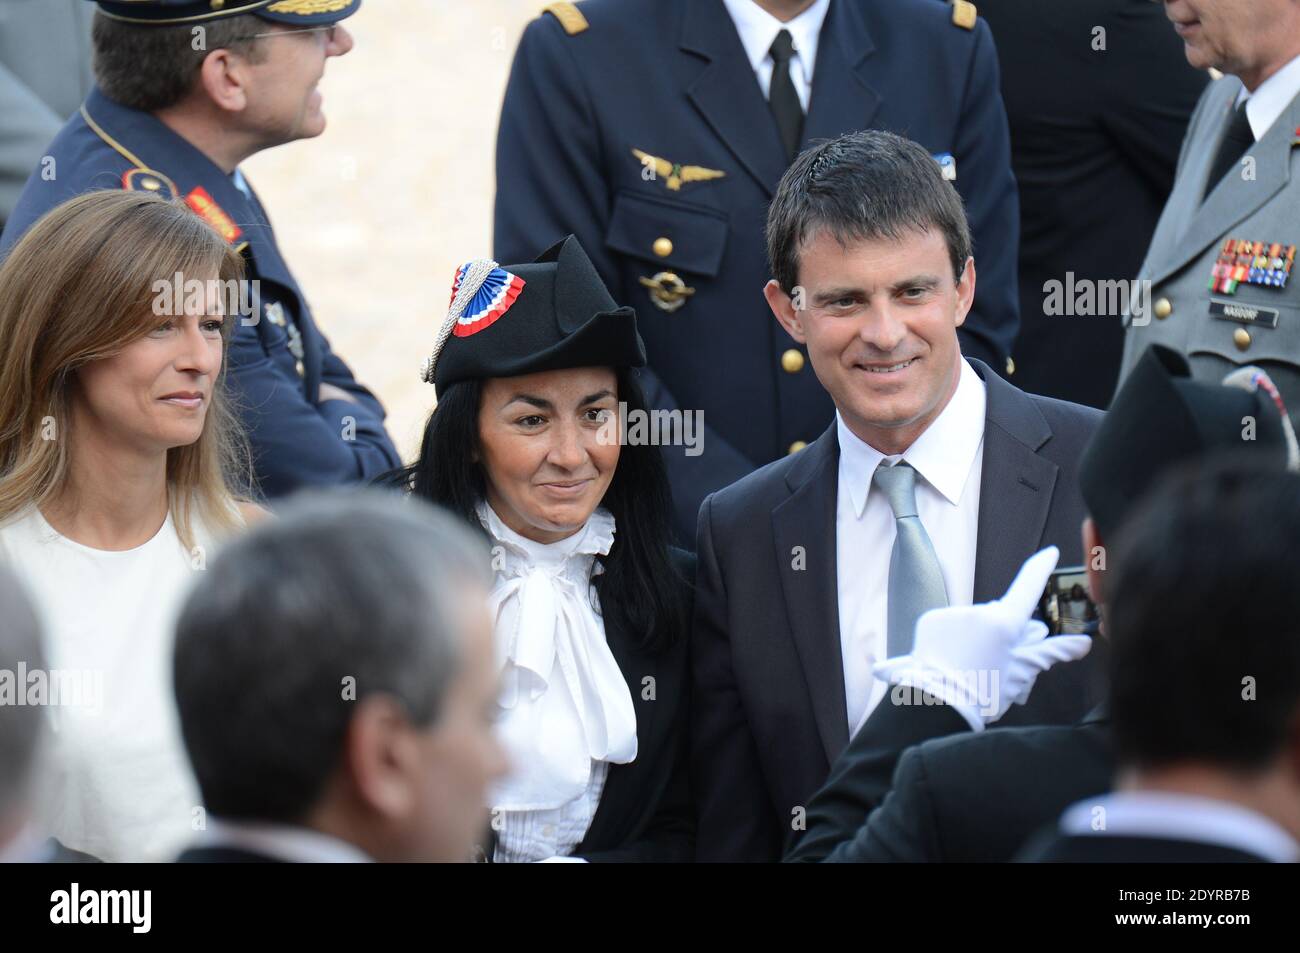 Manuel Valls and wife Anne Gravoin attending the 2013 annual Bastille Day military parade on Place de la Concorde square in Paris, France on July 14, 2013. Photo by Ammar Abd Rabbo/ABACAPRESS.COM Stock Photo